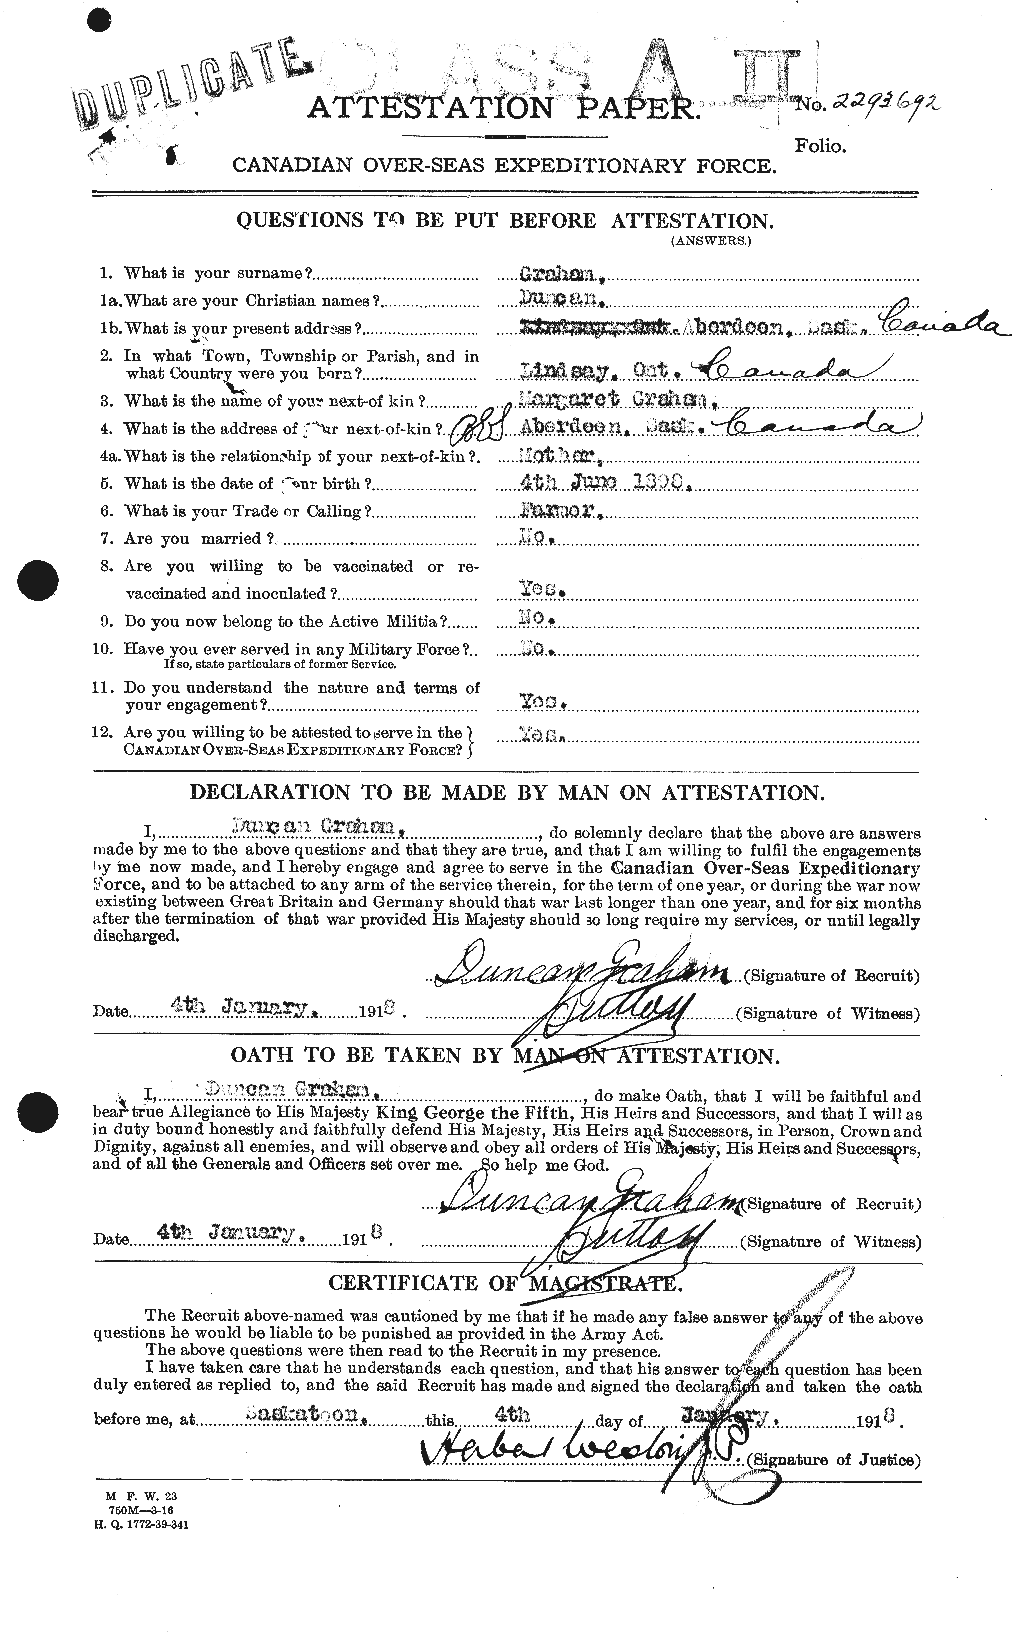 Personnel Records of the First World War - CEF 353850a